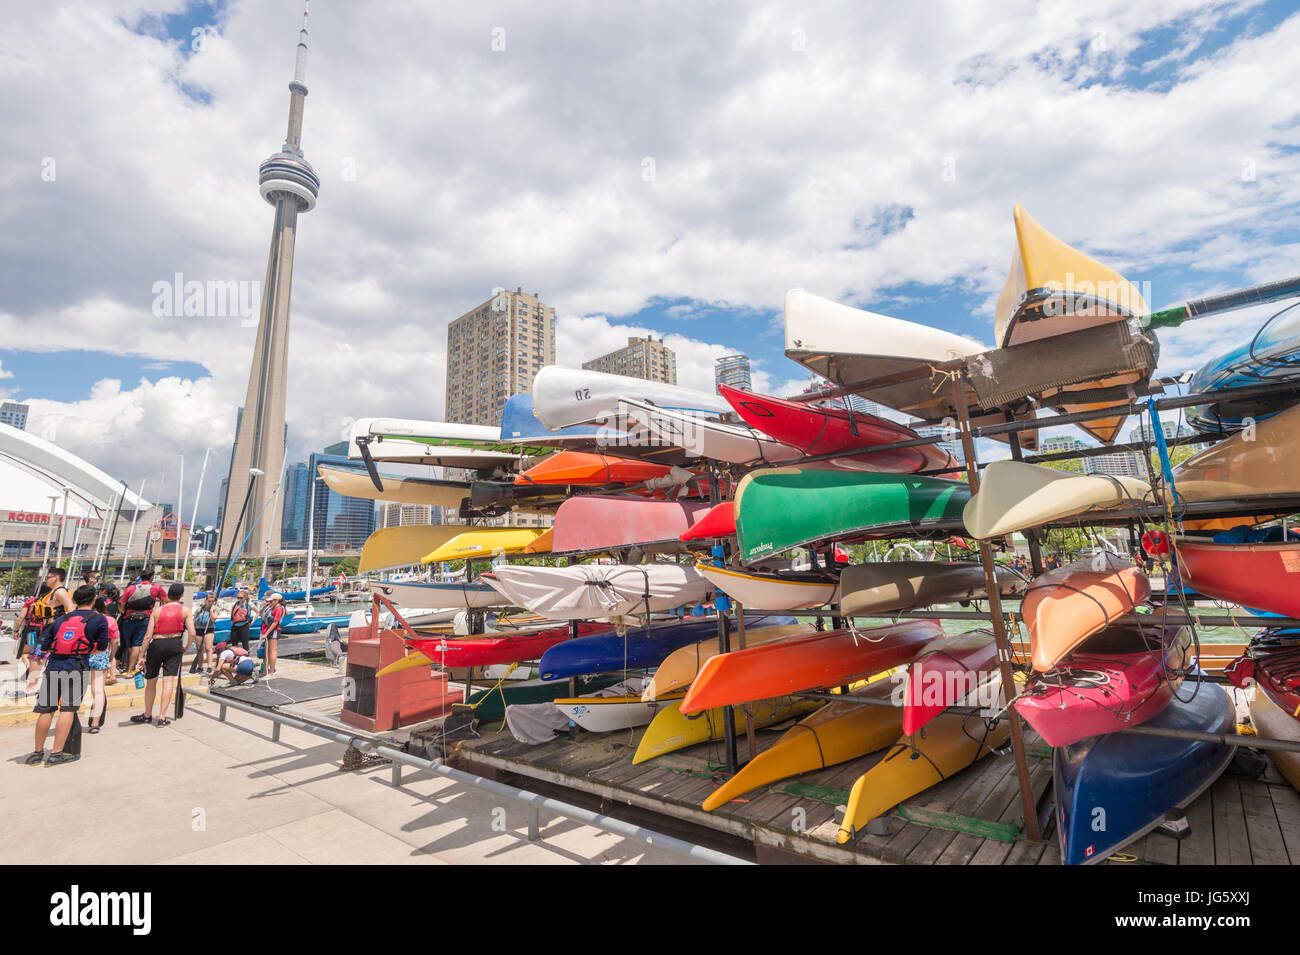 Toronto, Canada - 26 June 2017: Racks of brightly colored kayaks and canoes at Toronto waterfront in summer, with CN Tower in the background Stock Photo